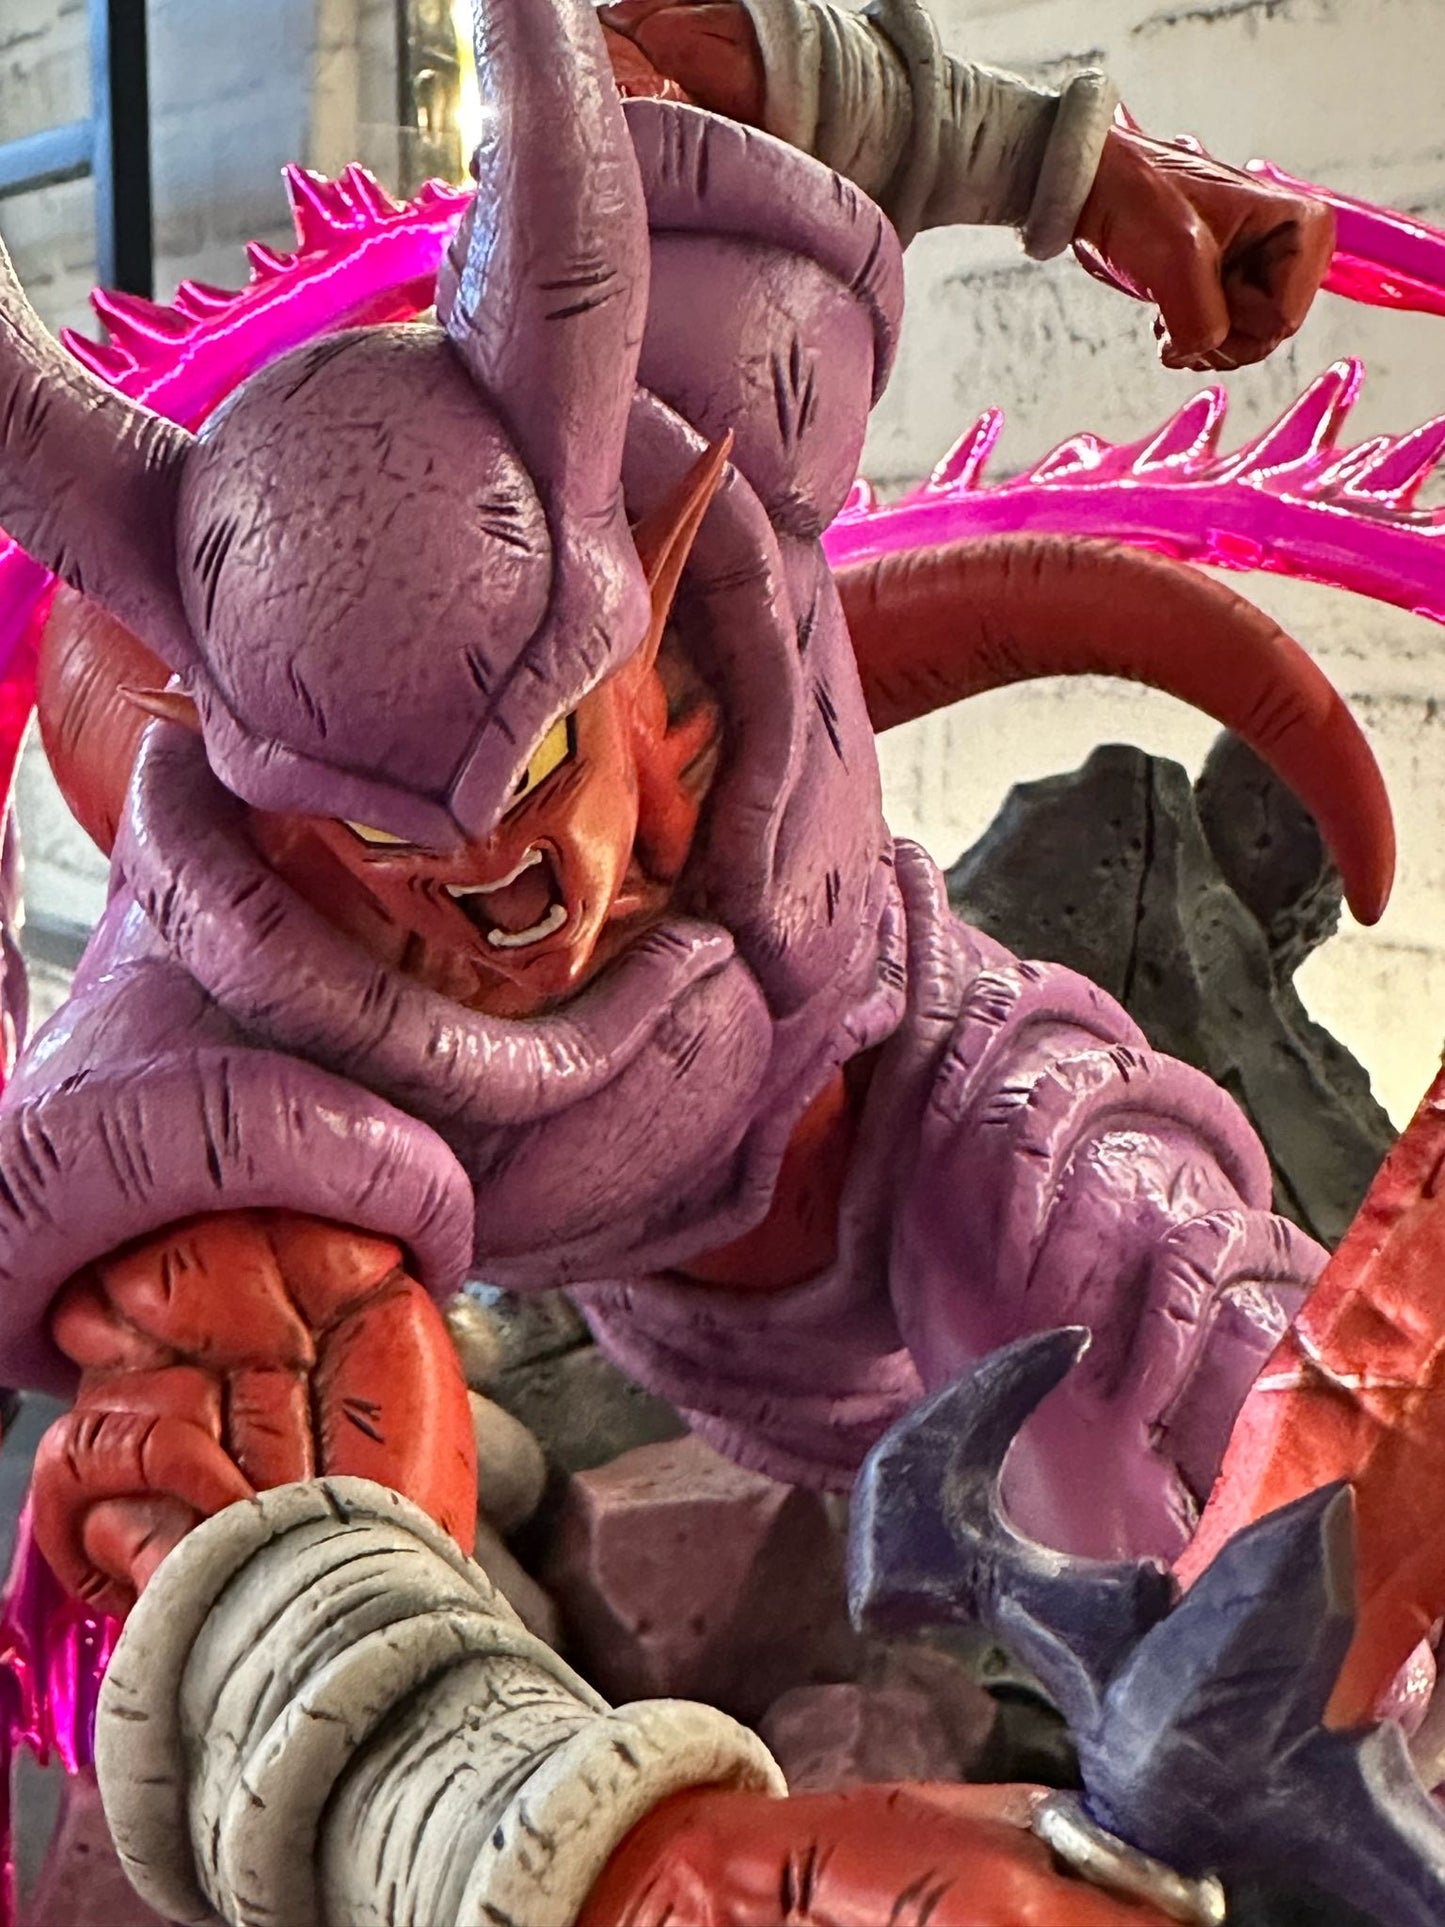 [IN STOCK] Dragon Ball - Dynamic Studio - Goku vs Janemba Resin Statue (Price Does Not Include Shipping - Please Read Description)